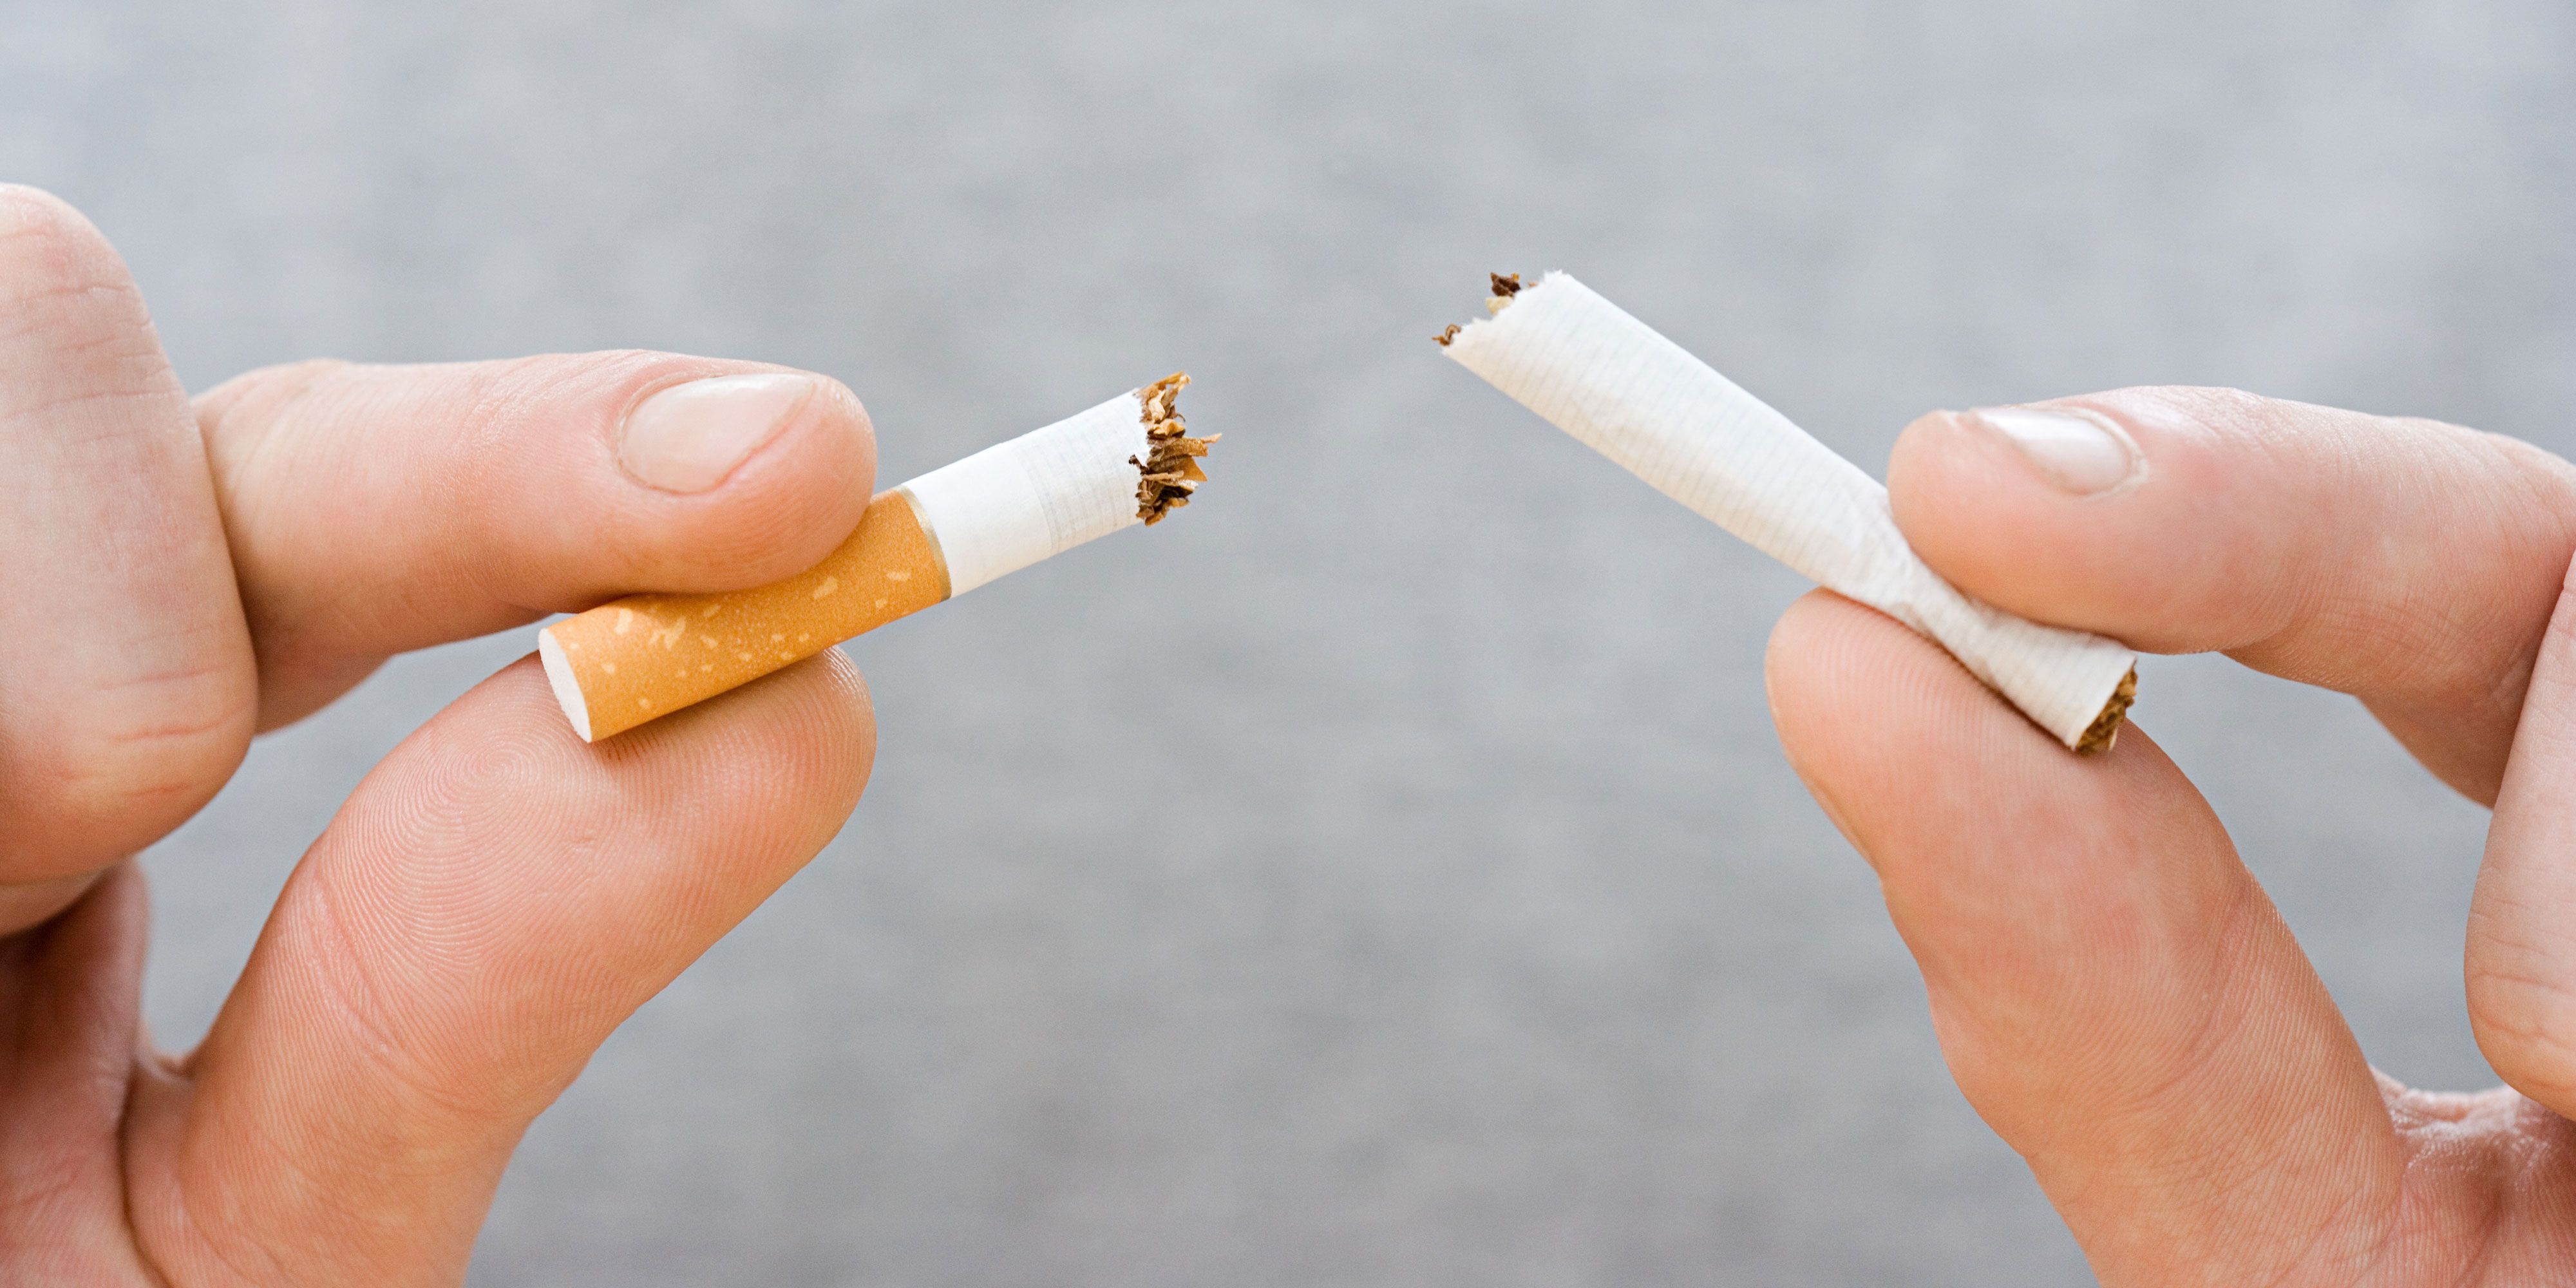 Tar and Nicotine content of every cigarette by Brand and variety